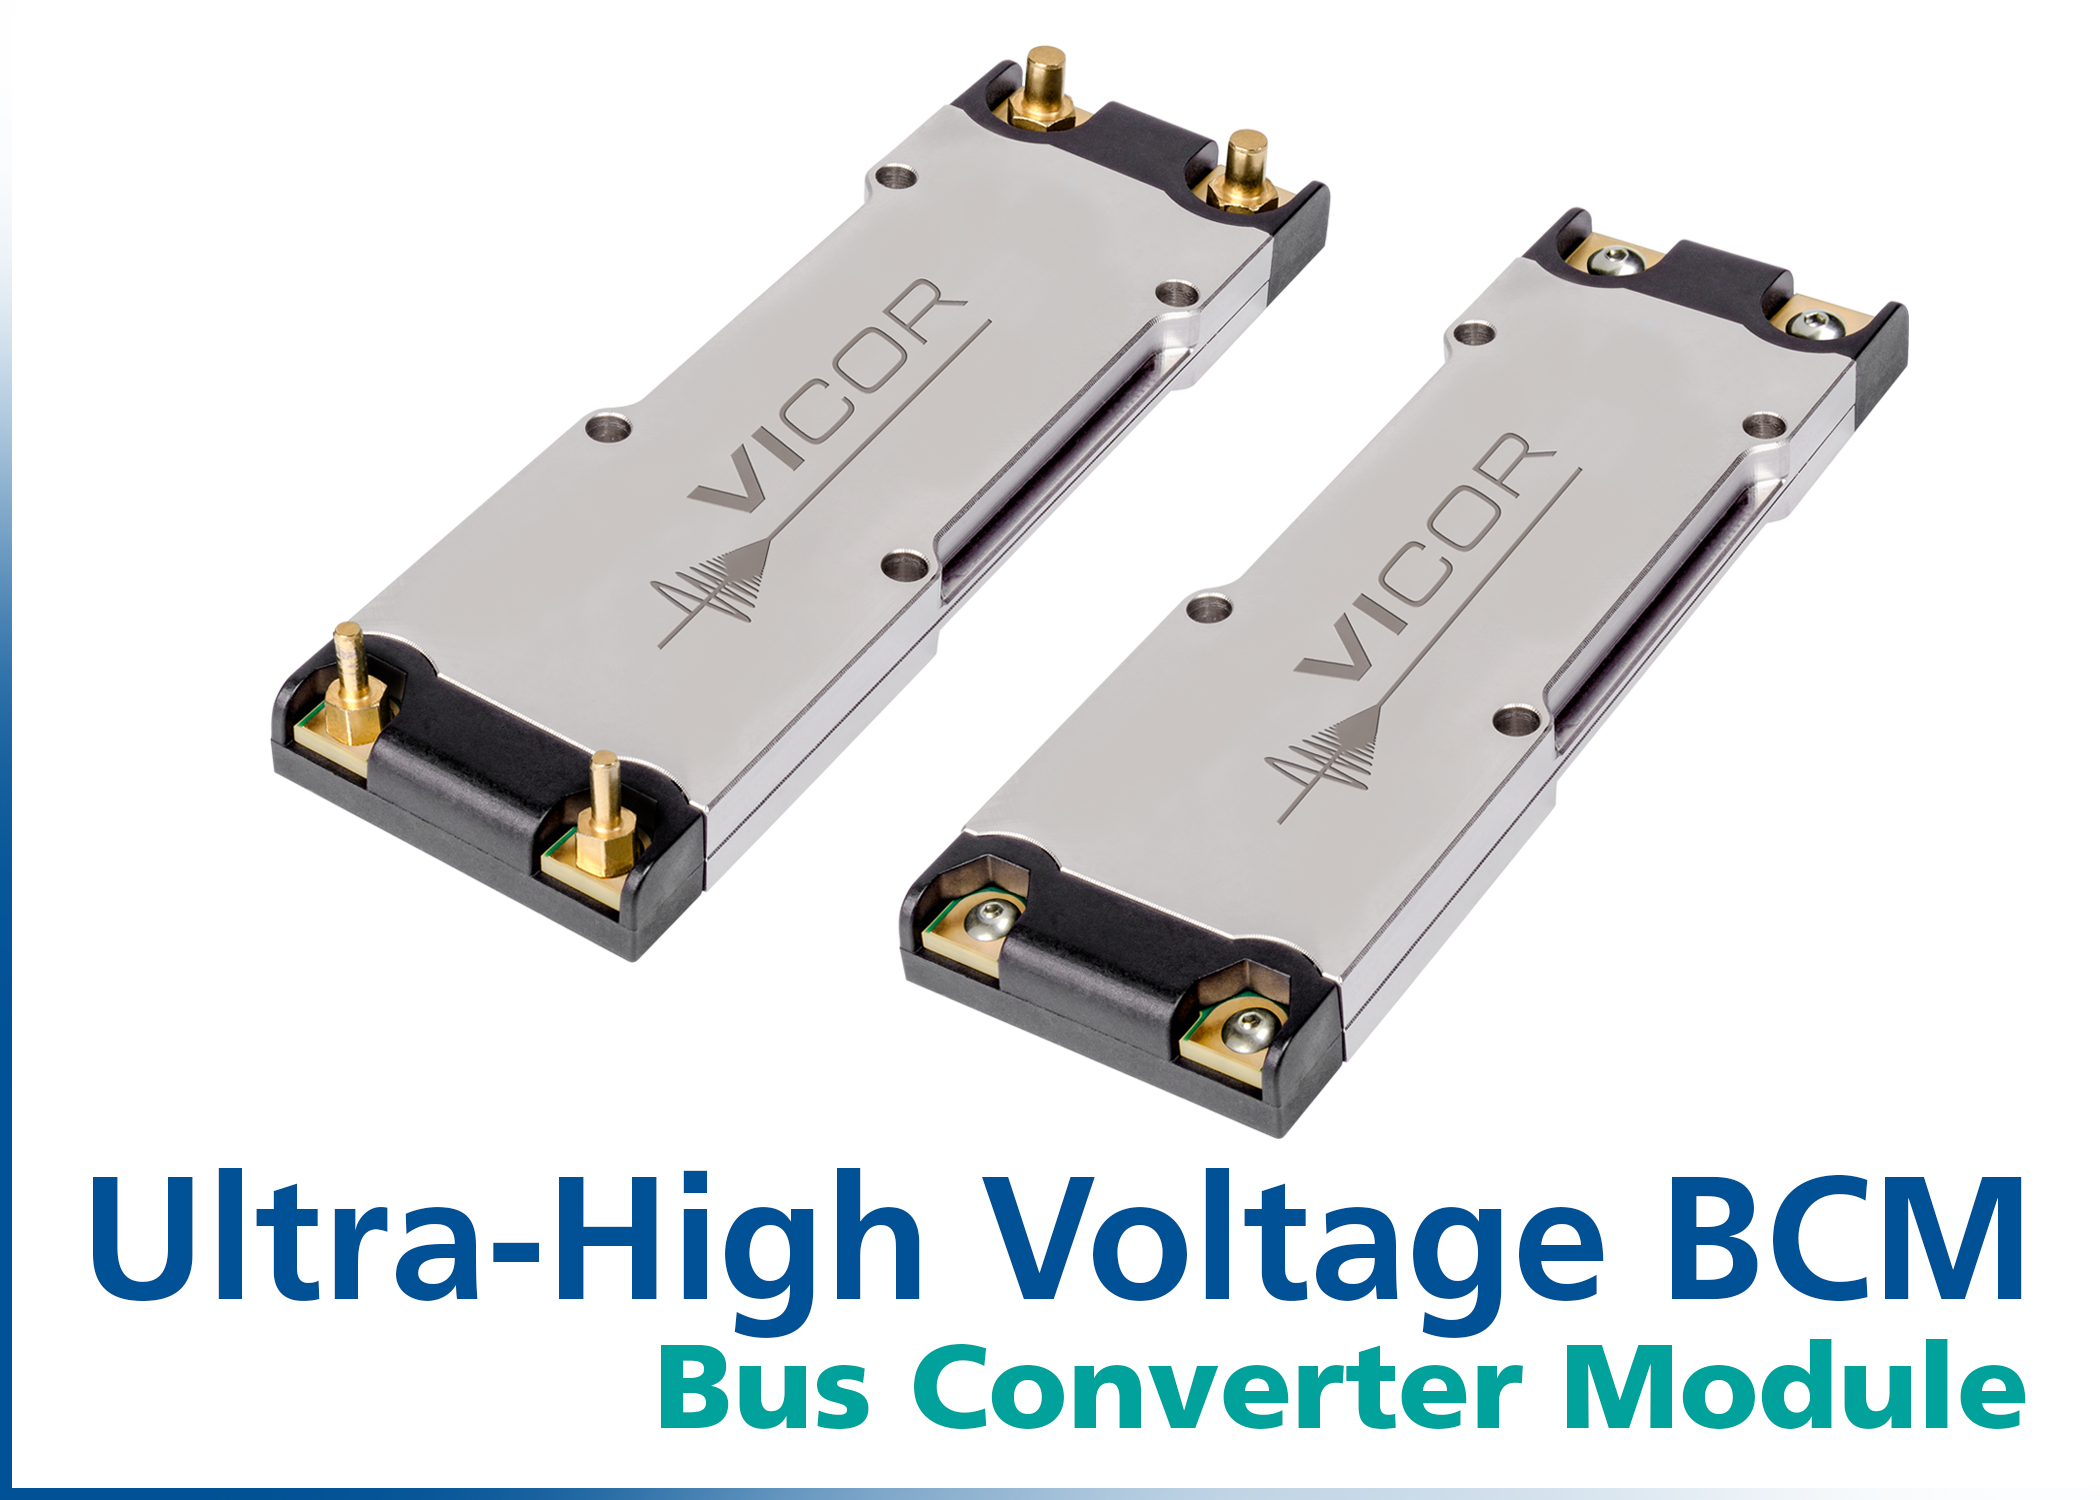 Ultra-High-Voltage Bus Converter Offers a Power Level of 1.75 kW and Peak Efficiency of 97%